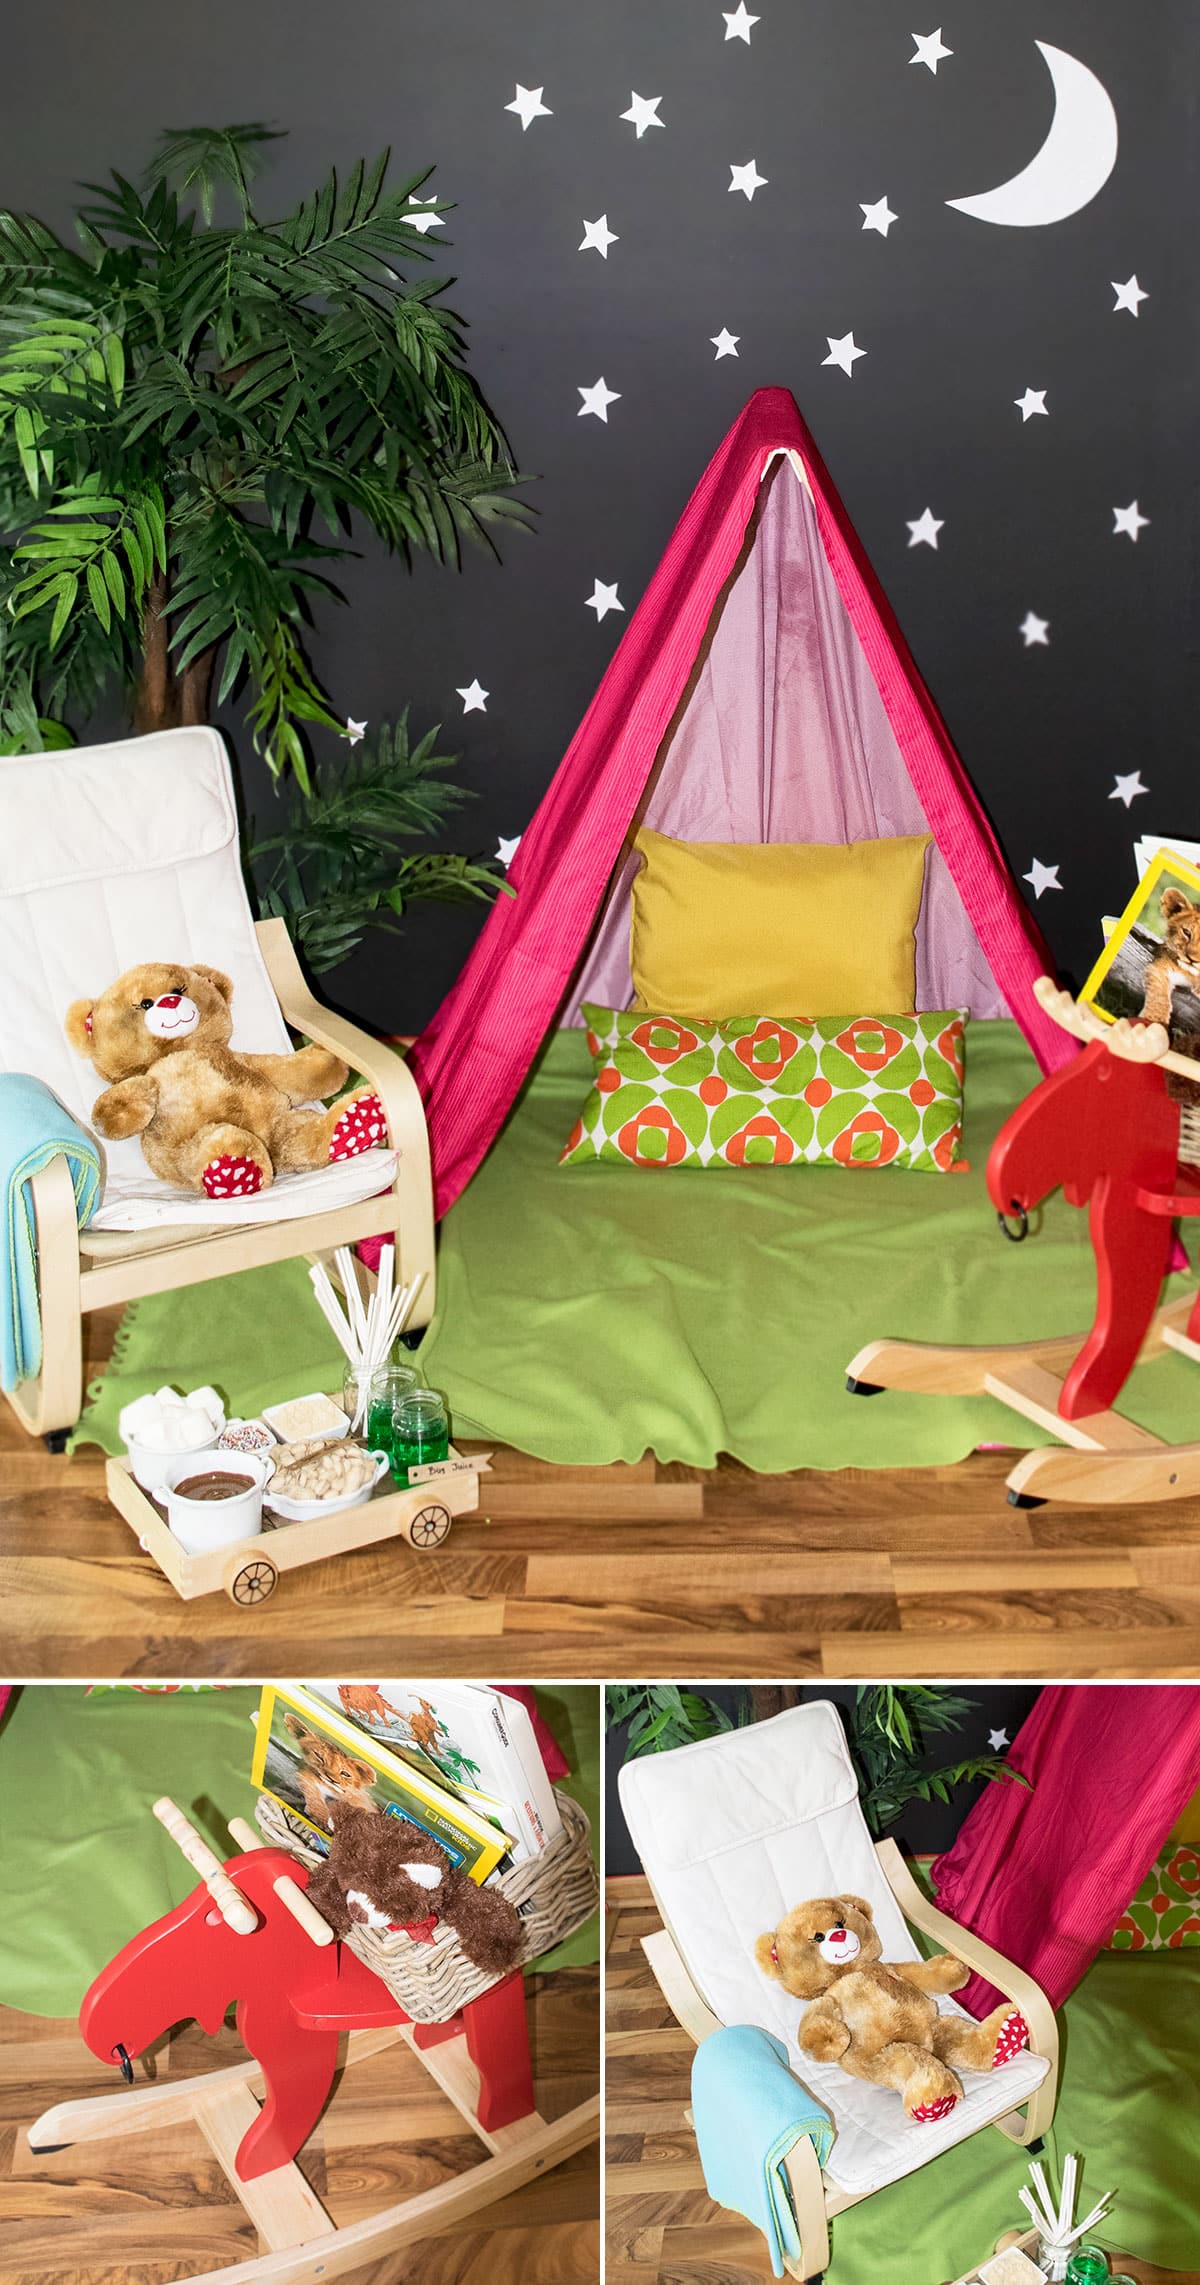 Collage Image With Indoor Camping Party Details.